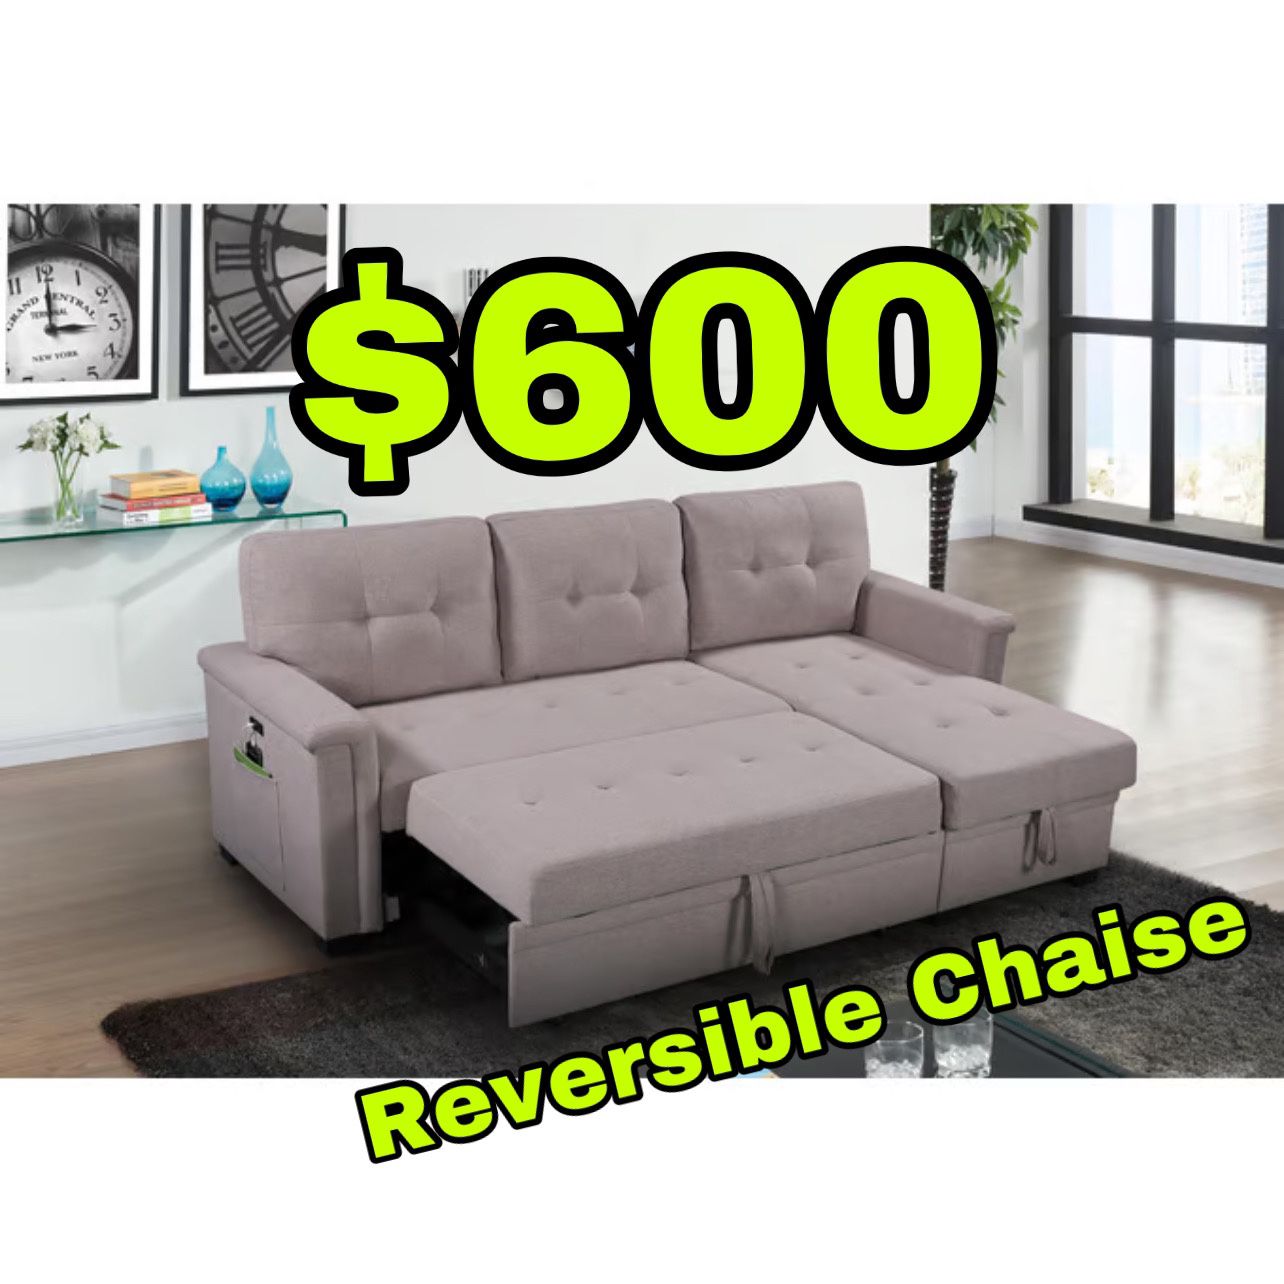 Beautiful New Sectional Sofa Bed W/ Reversible Storage Chaise & 2 USB Charging Ports in Light Gray Linen Only $600!!!